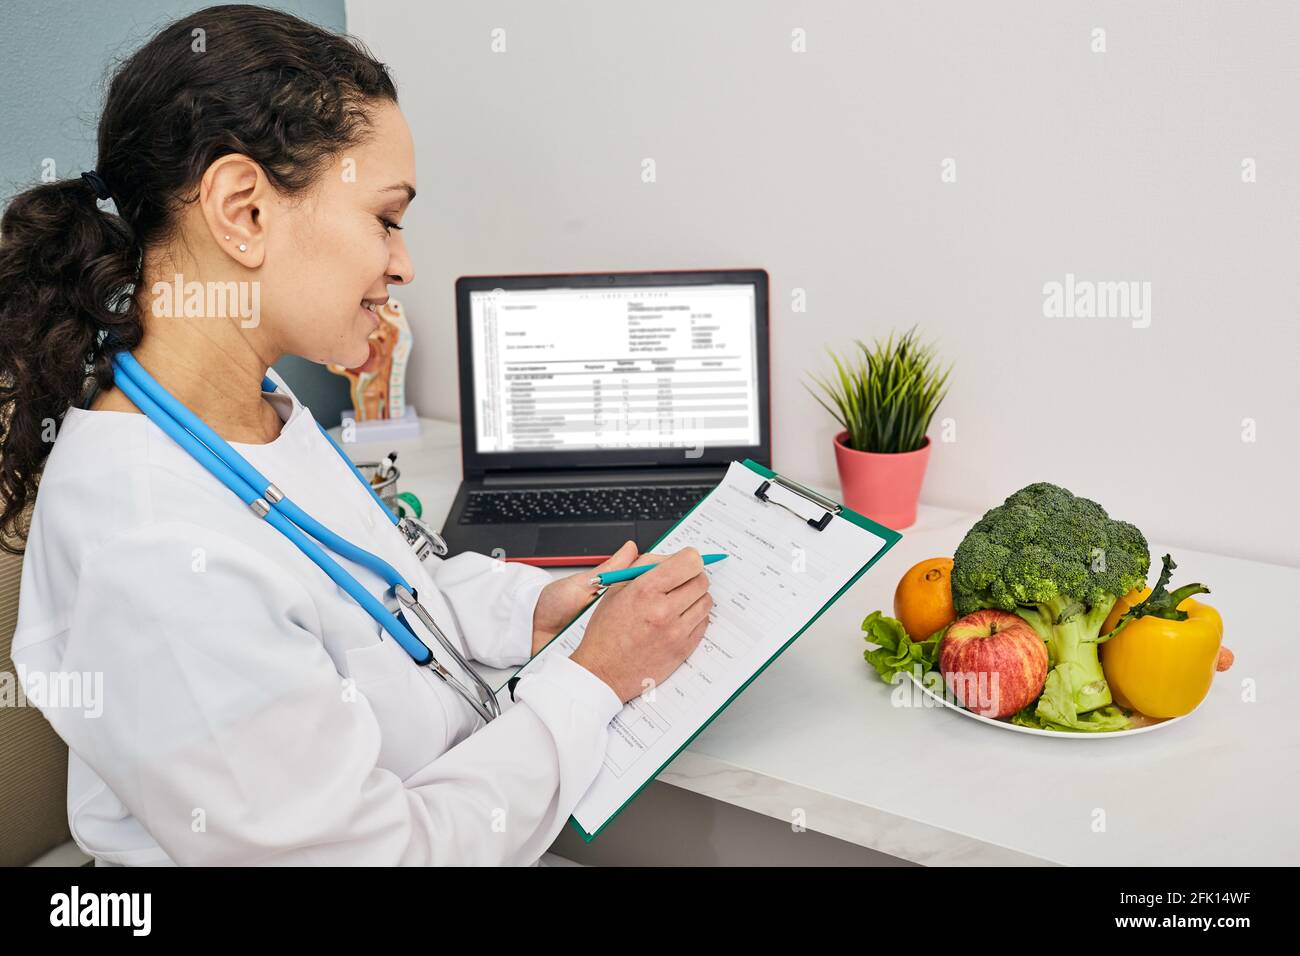 Nutritionist creates personalized meal plan for her patient. Vegetables and fruits for a healthy diet Stock Photo